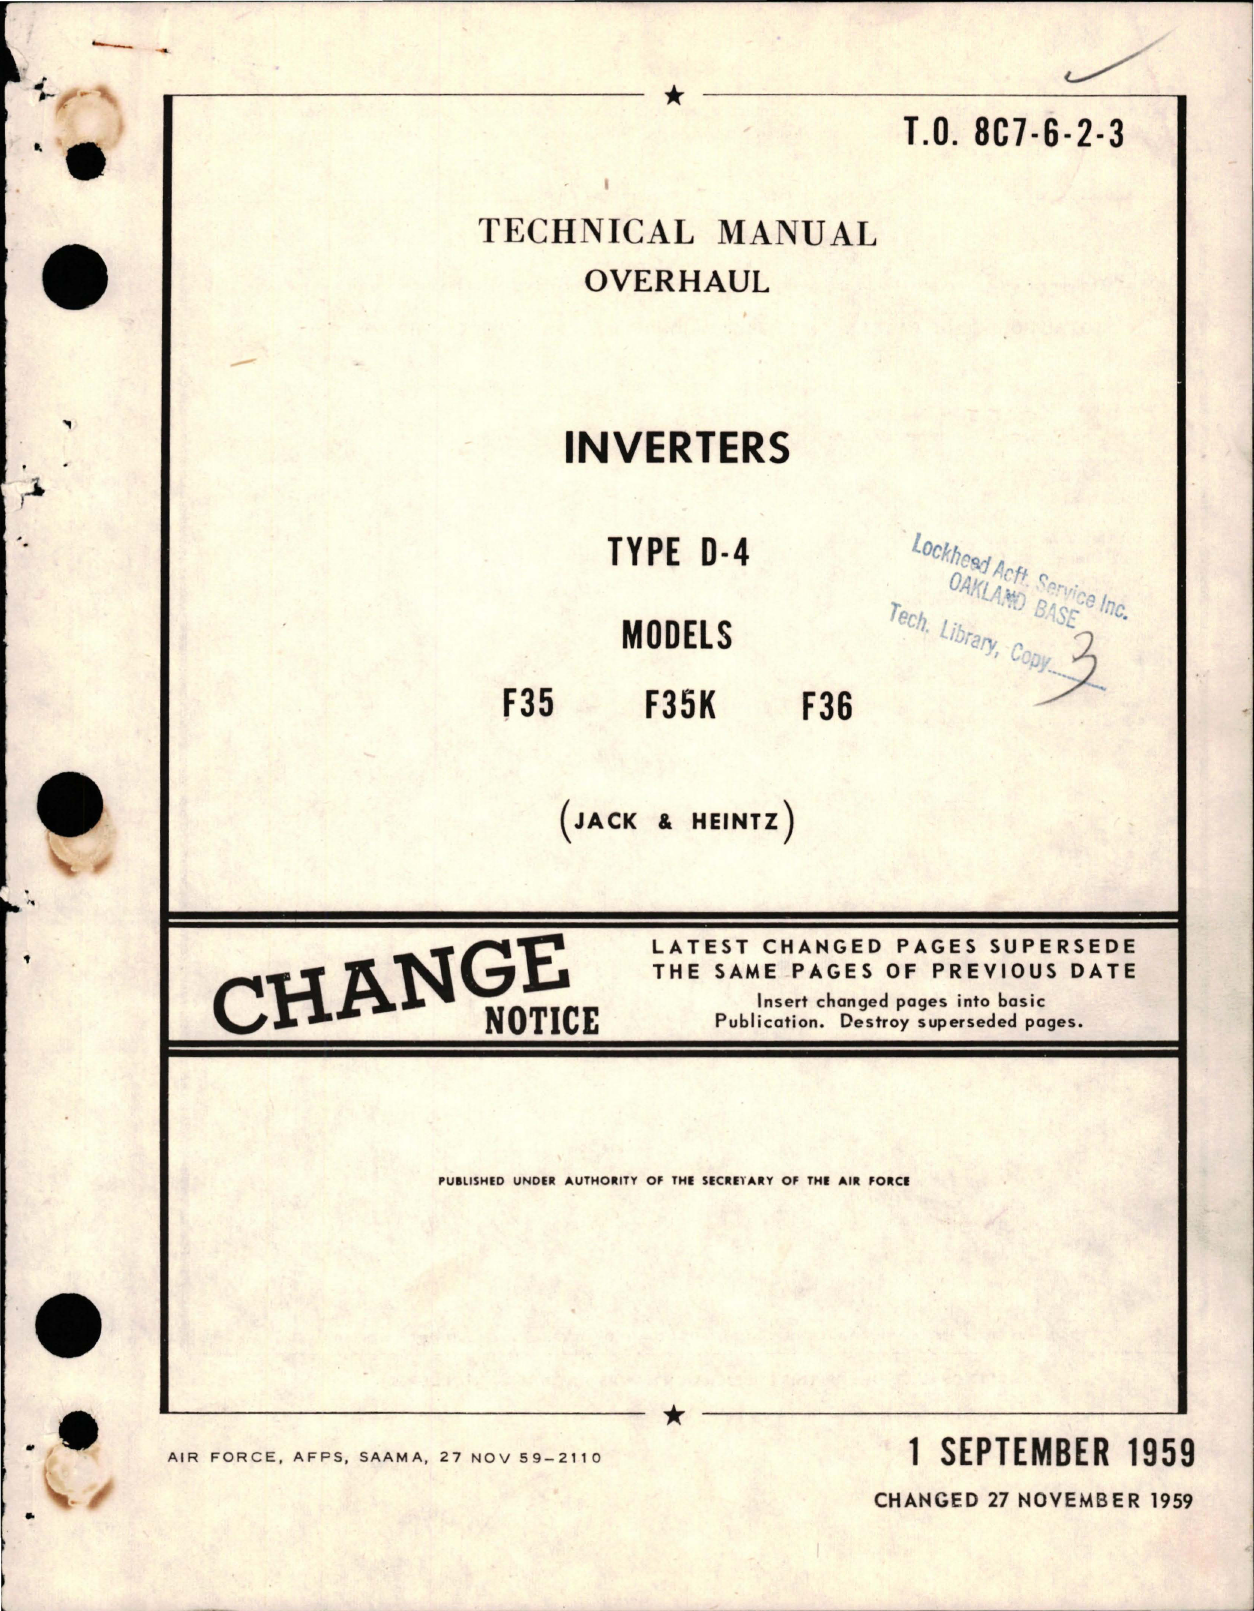 Sample page 1 from AirCorps Library document: Overhaul for Inverters - Type D-4 - Models F35, F35K, and F36